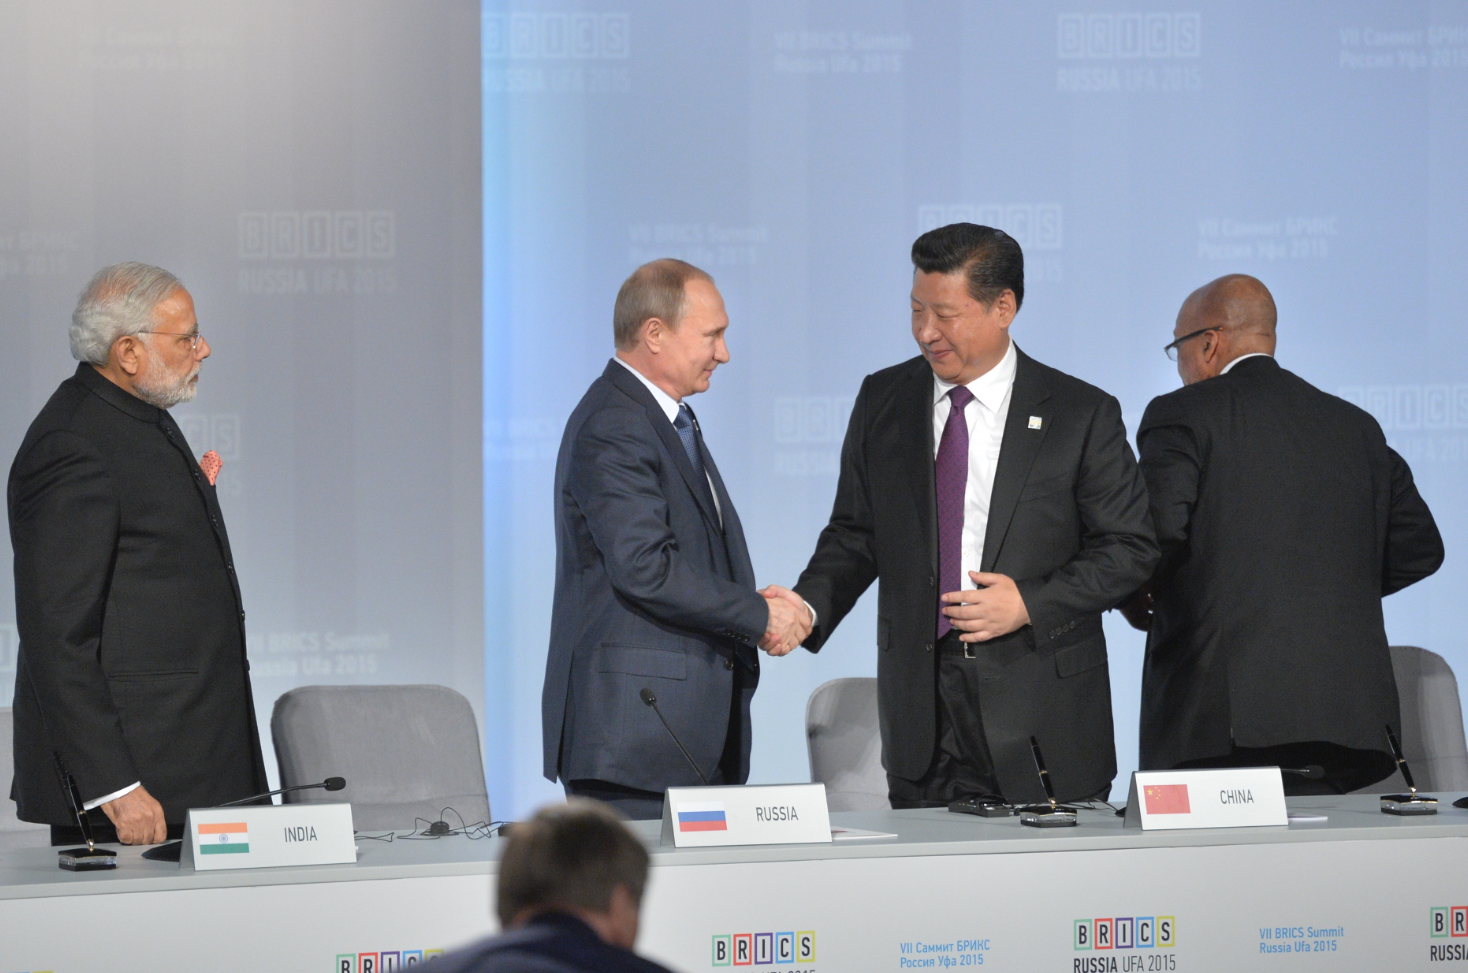 The BRICS format has not helped bring China and India closer.